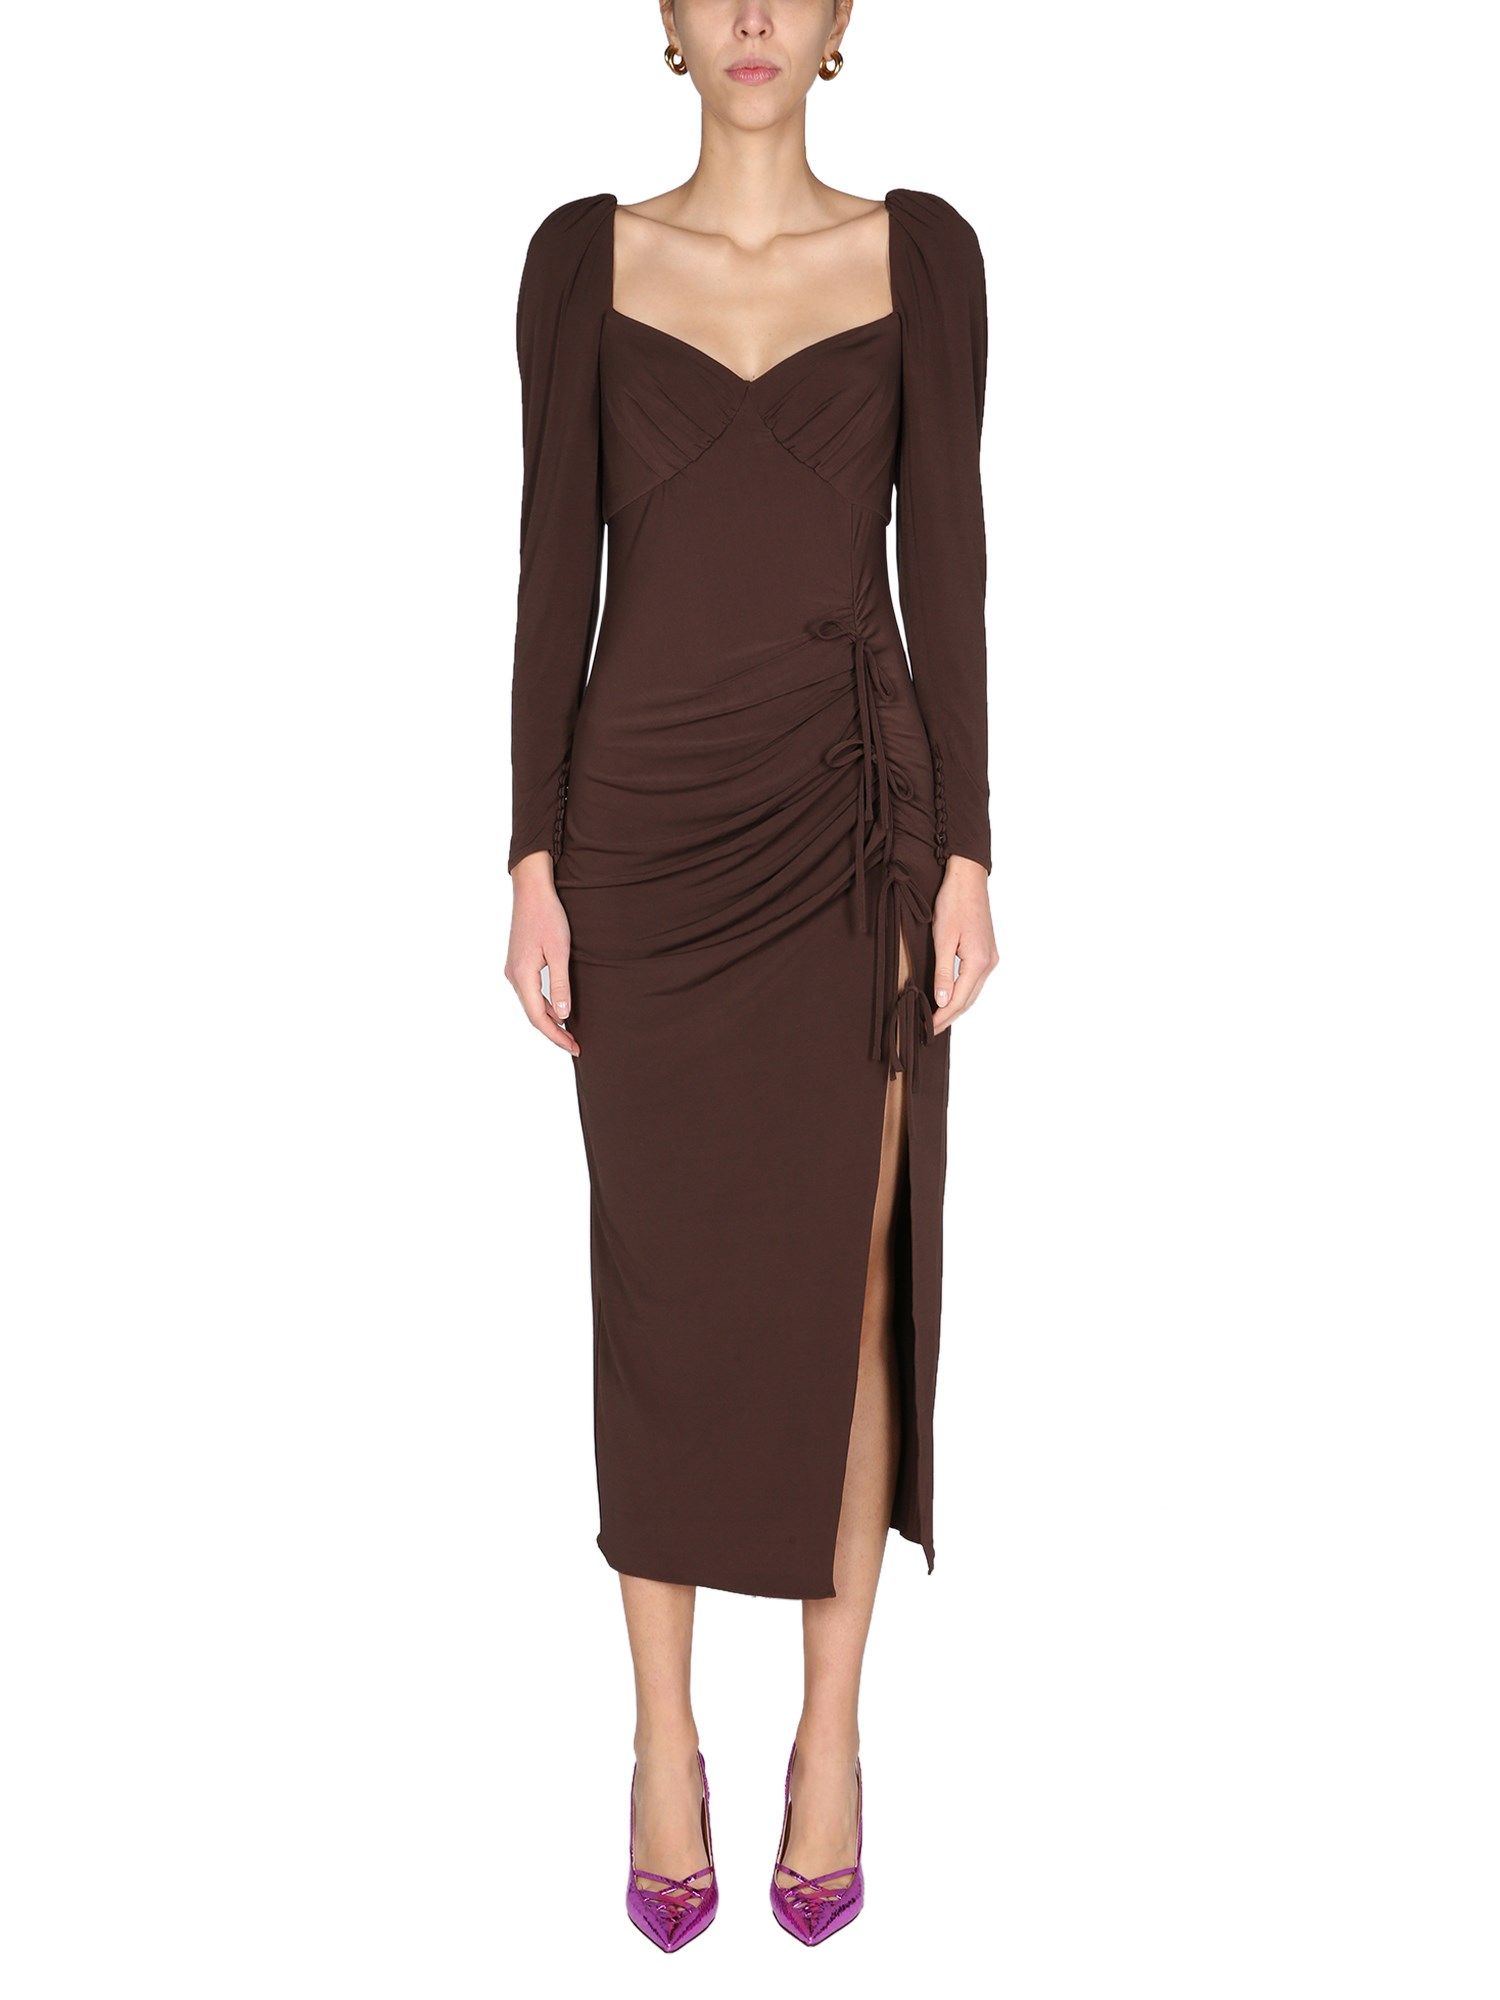 self-portrait dress with draping